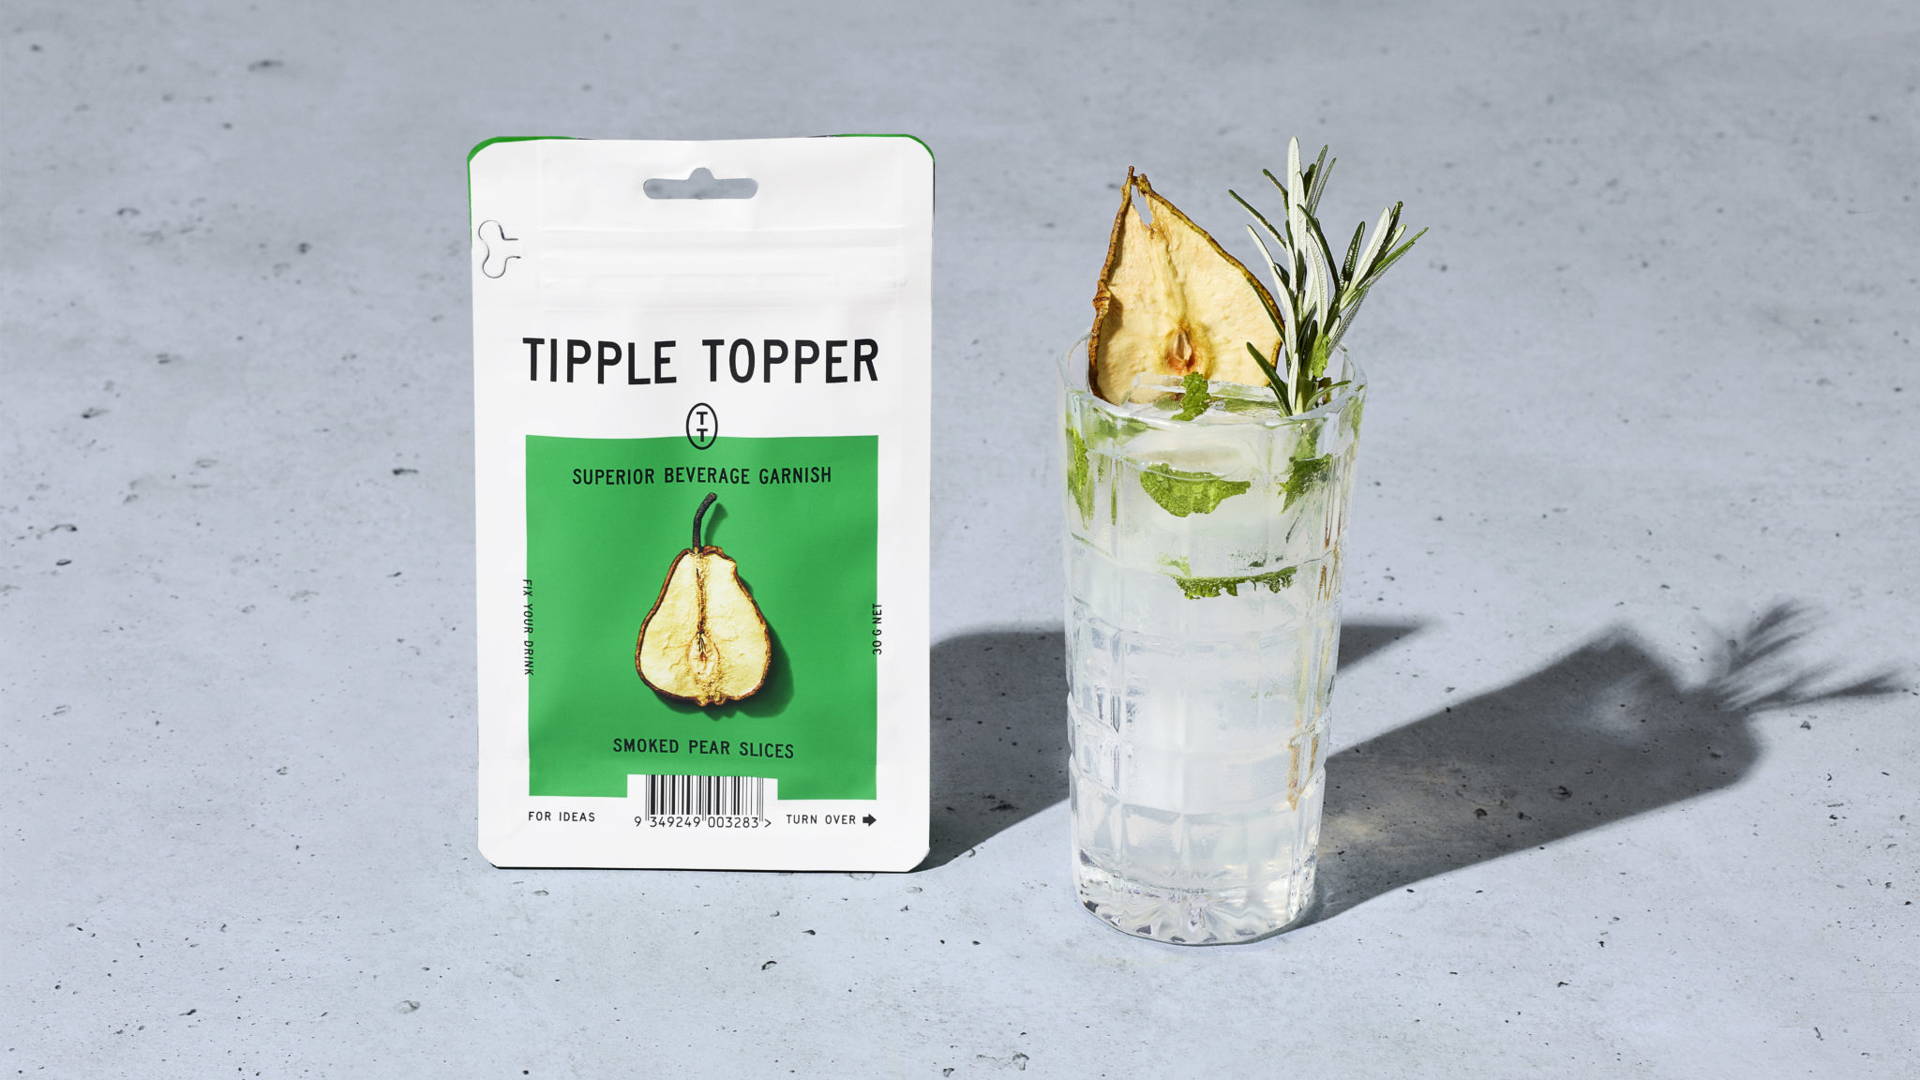 Featured image for Marx Design Blends Utilitarian Packaging With Swanky Cocktail Toppers For Brand Tipple Topper